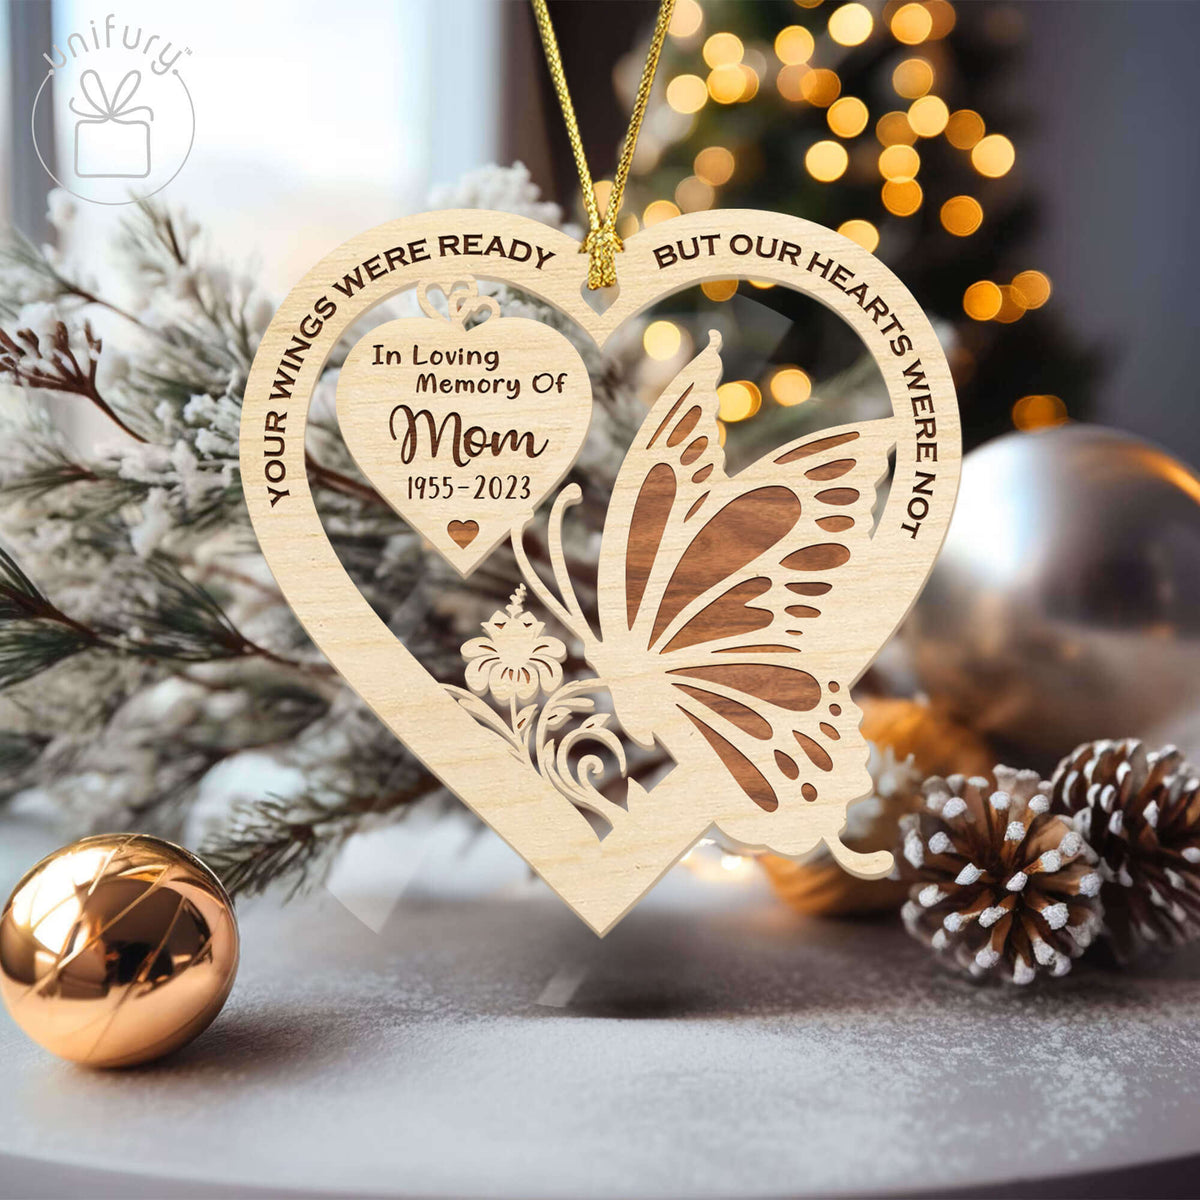 Your Wings Were Ready Heart Memorial Customized Wooden Ornaments